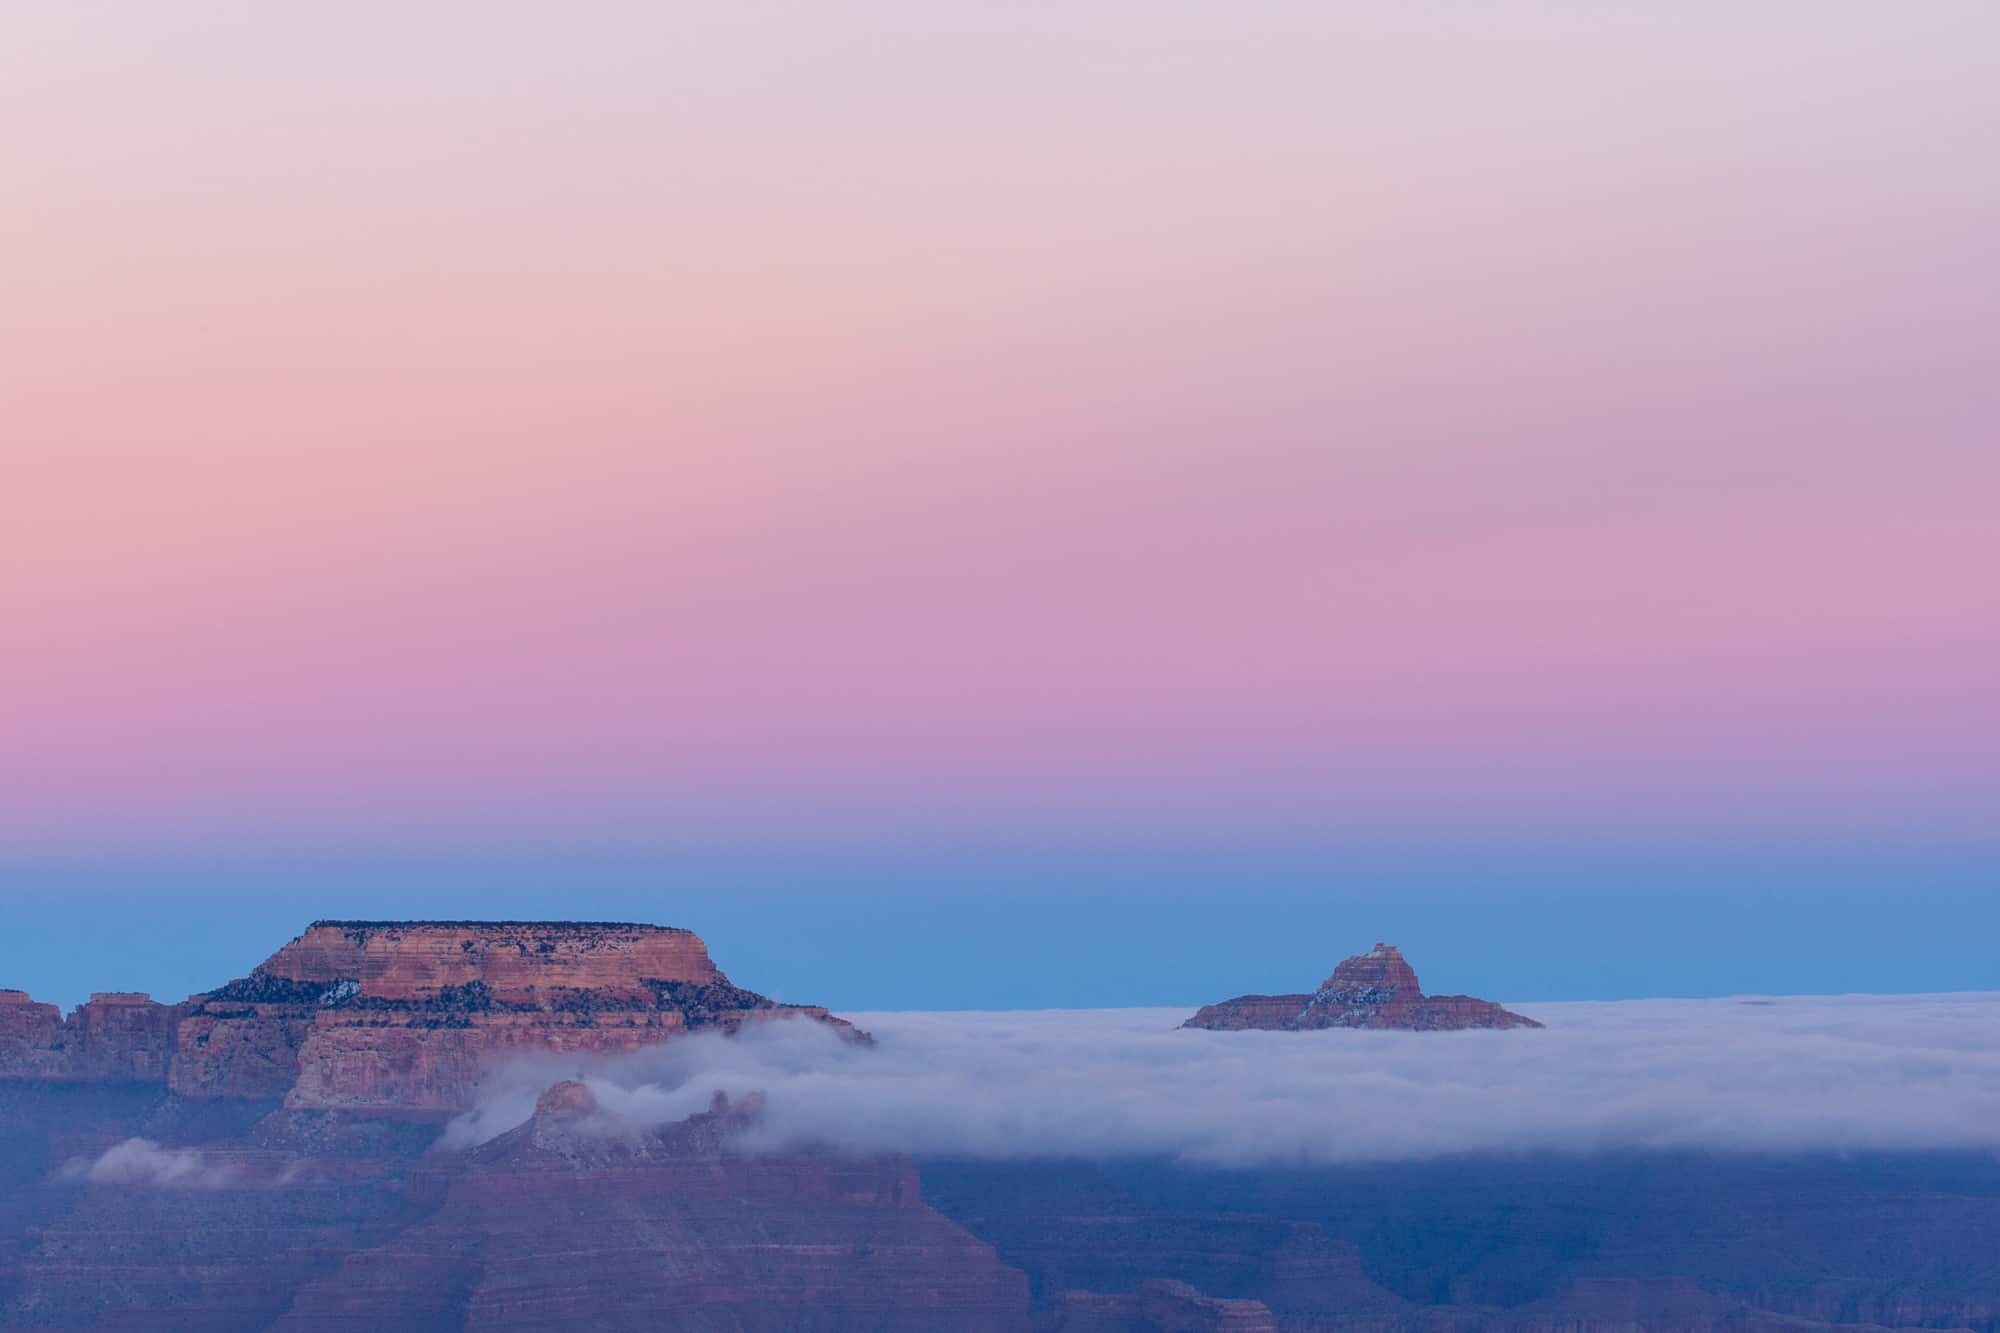 the grand canyon socked in after sunset led to an incredible photo of the peaks almost floating above the cloud cover